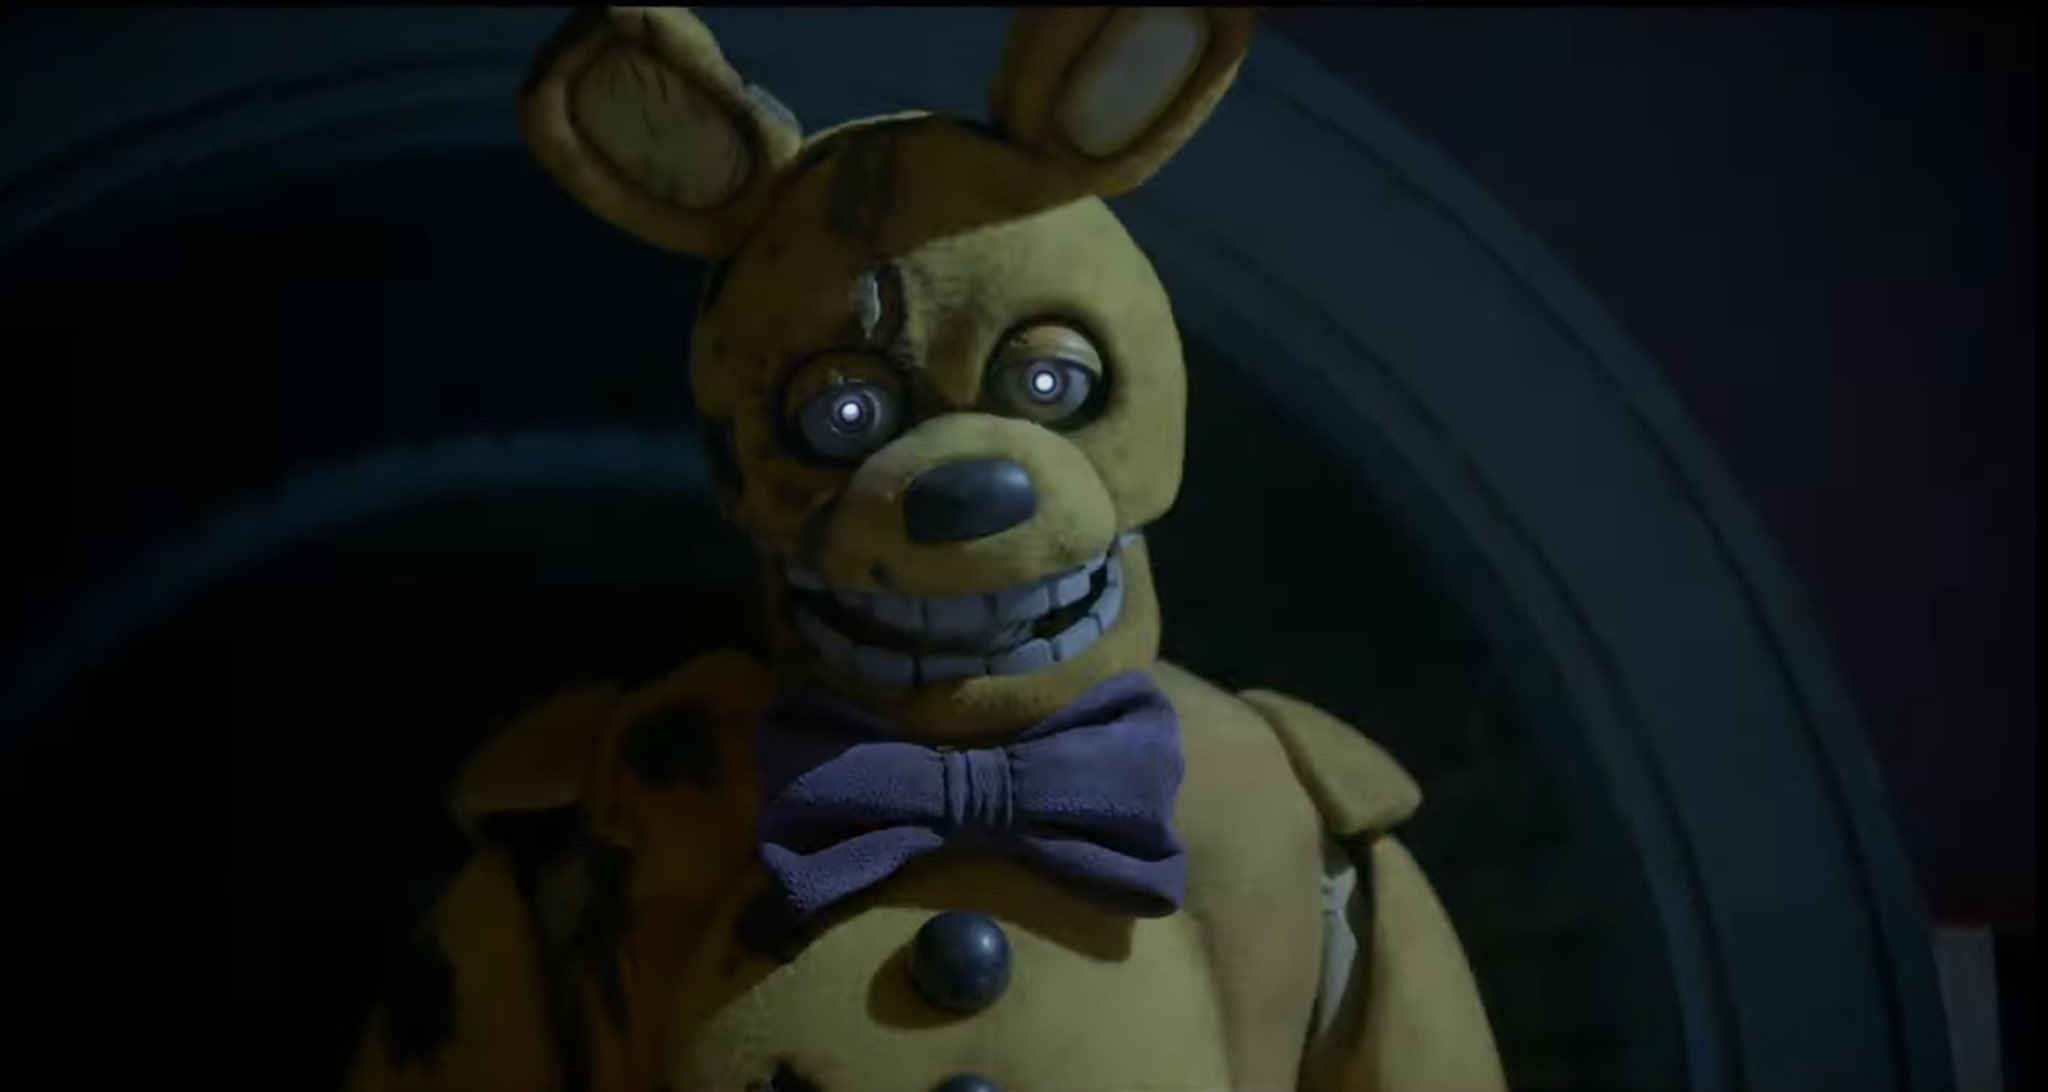 Vomfee on X: Scott Cawthon under his new reddit post confirms that Five  Nights at Freddy's 3 is going to be his last game .   / X